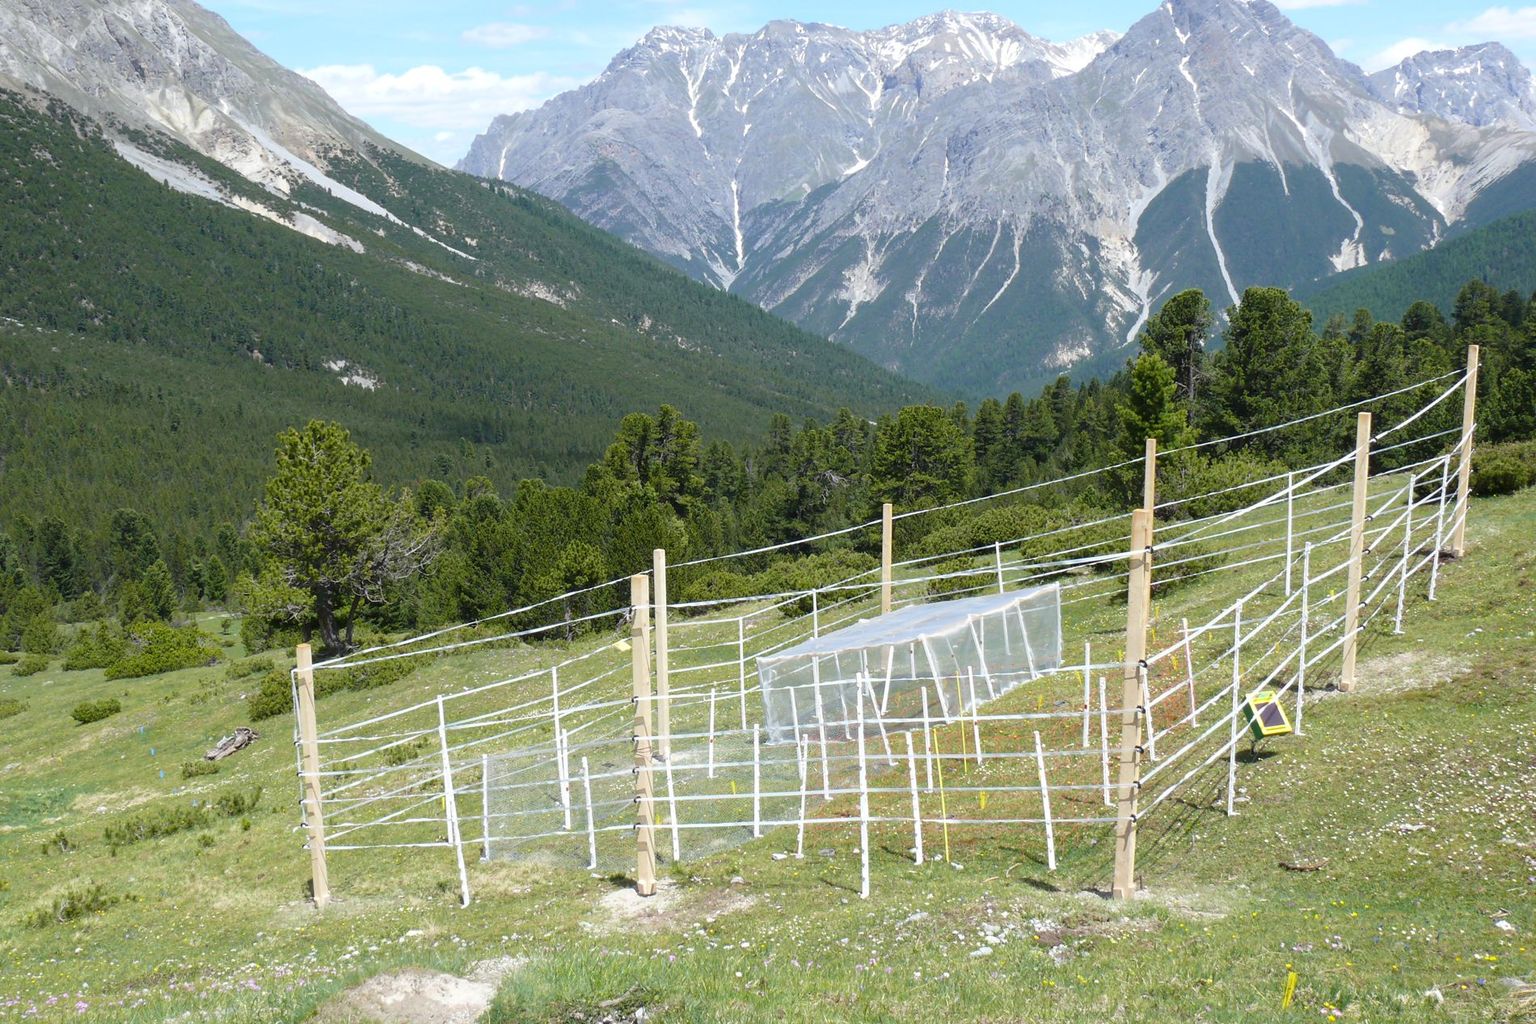 Project on size-selective exclusion of mammals and invertebrates of the Swiss Federal Institute for Forest, Snow and Landscape Research (WSL), 2010–2015. Project management: Martin Schütz and Anita Risch